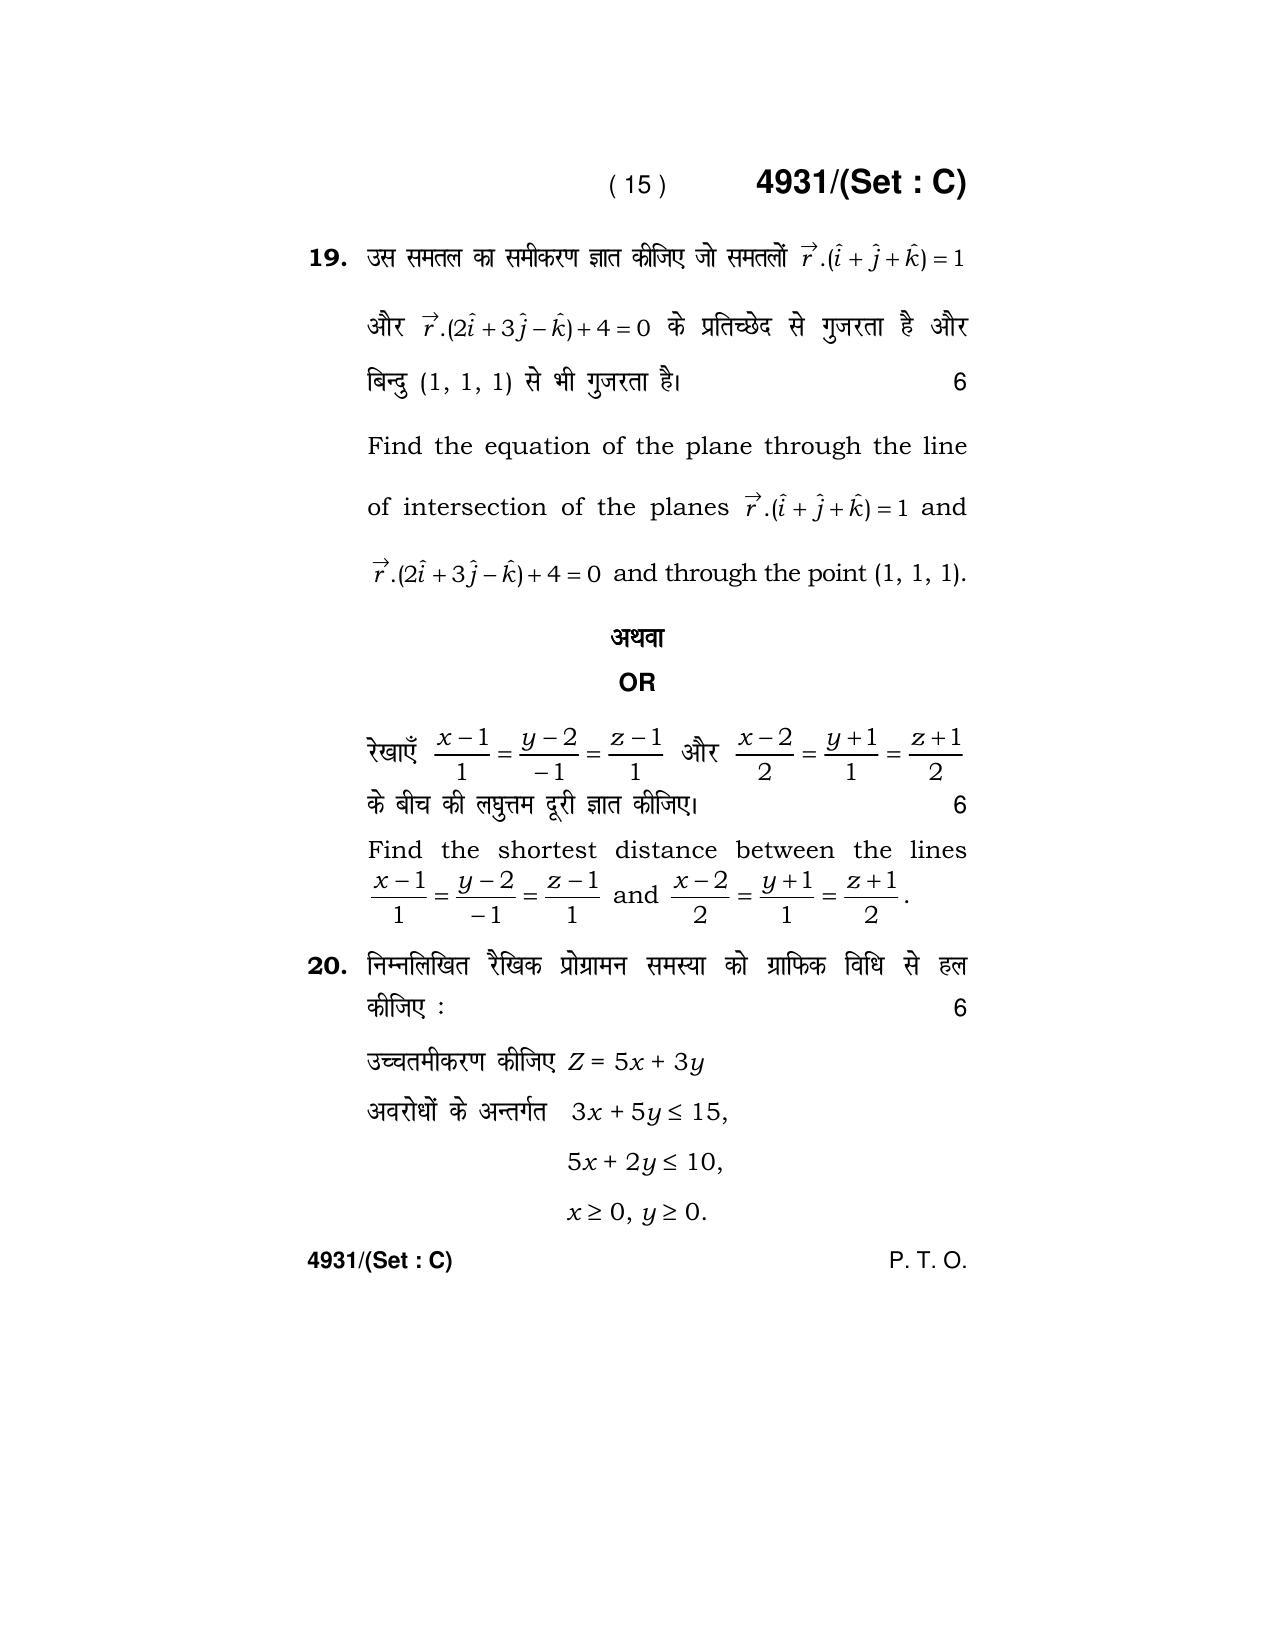 Haryana Board HBSE Class 12 Mathematics 2020 Question Paper - Page 47